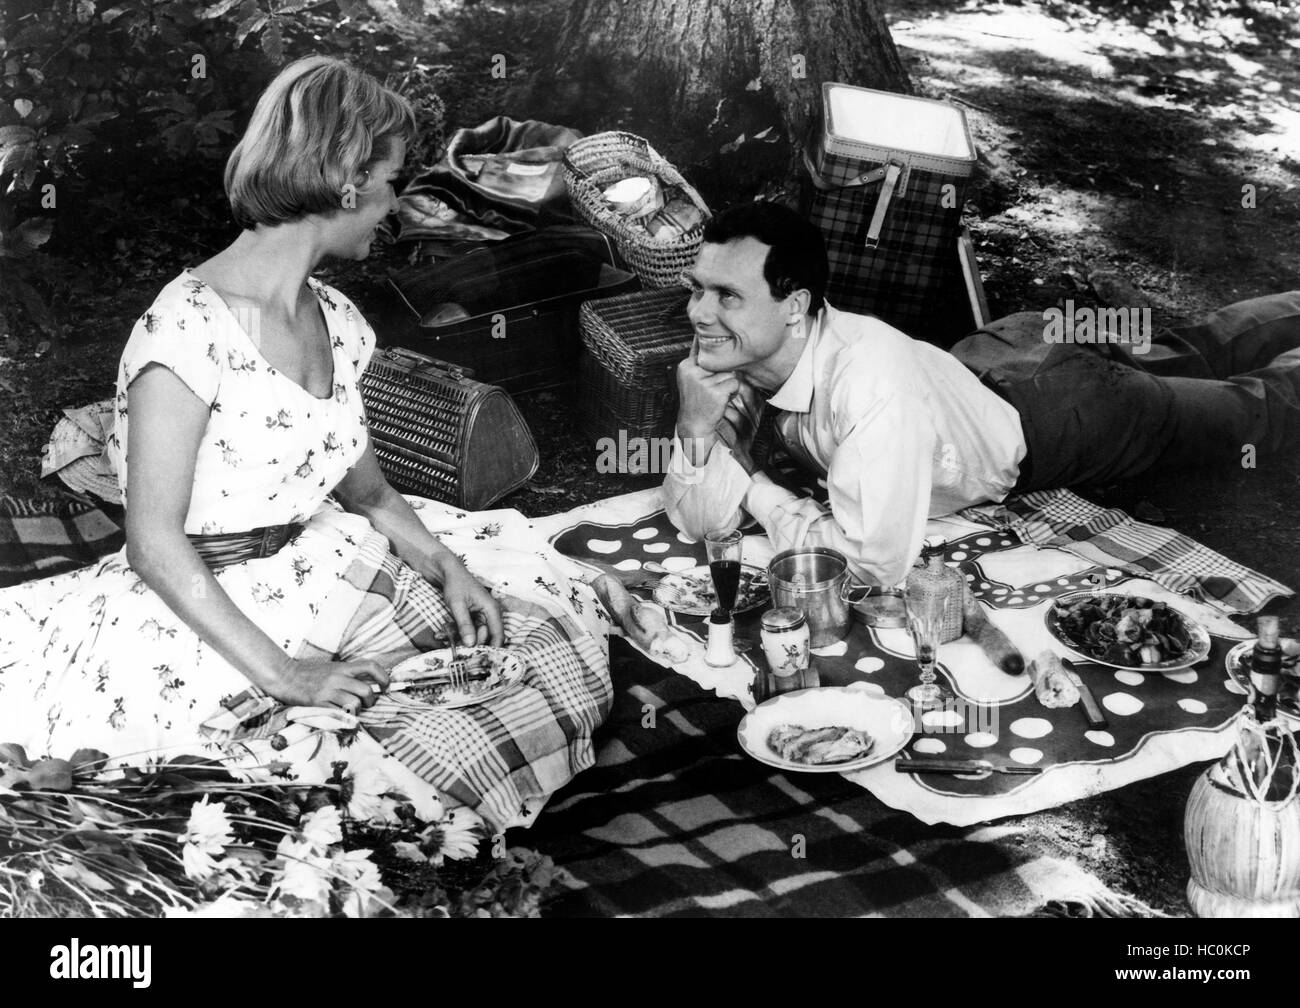 THE LOVE GAME, (aka LES JEUX DE L'AMOUR), Genevieve Cluny, Jean-Louis  Maury, 1960 Stock Photo - Alamy